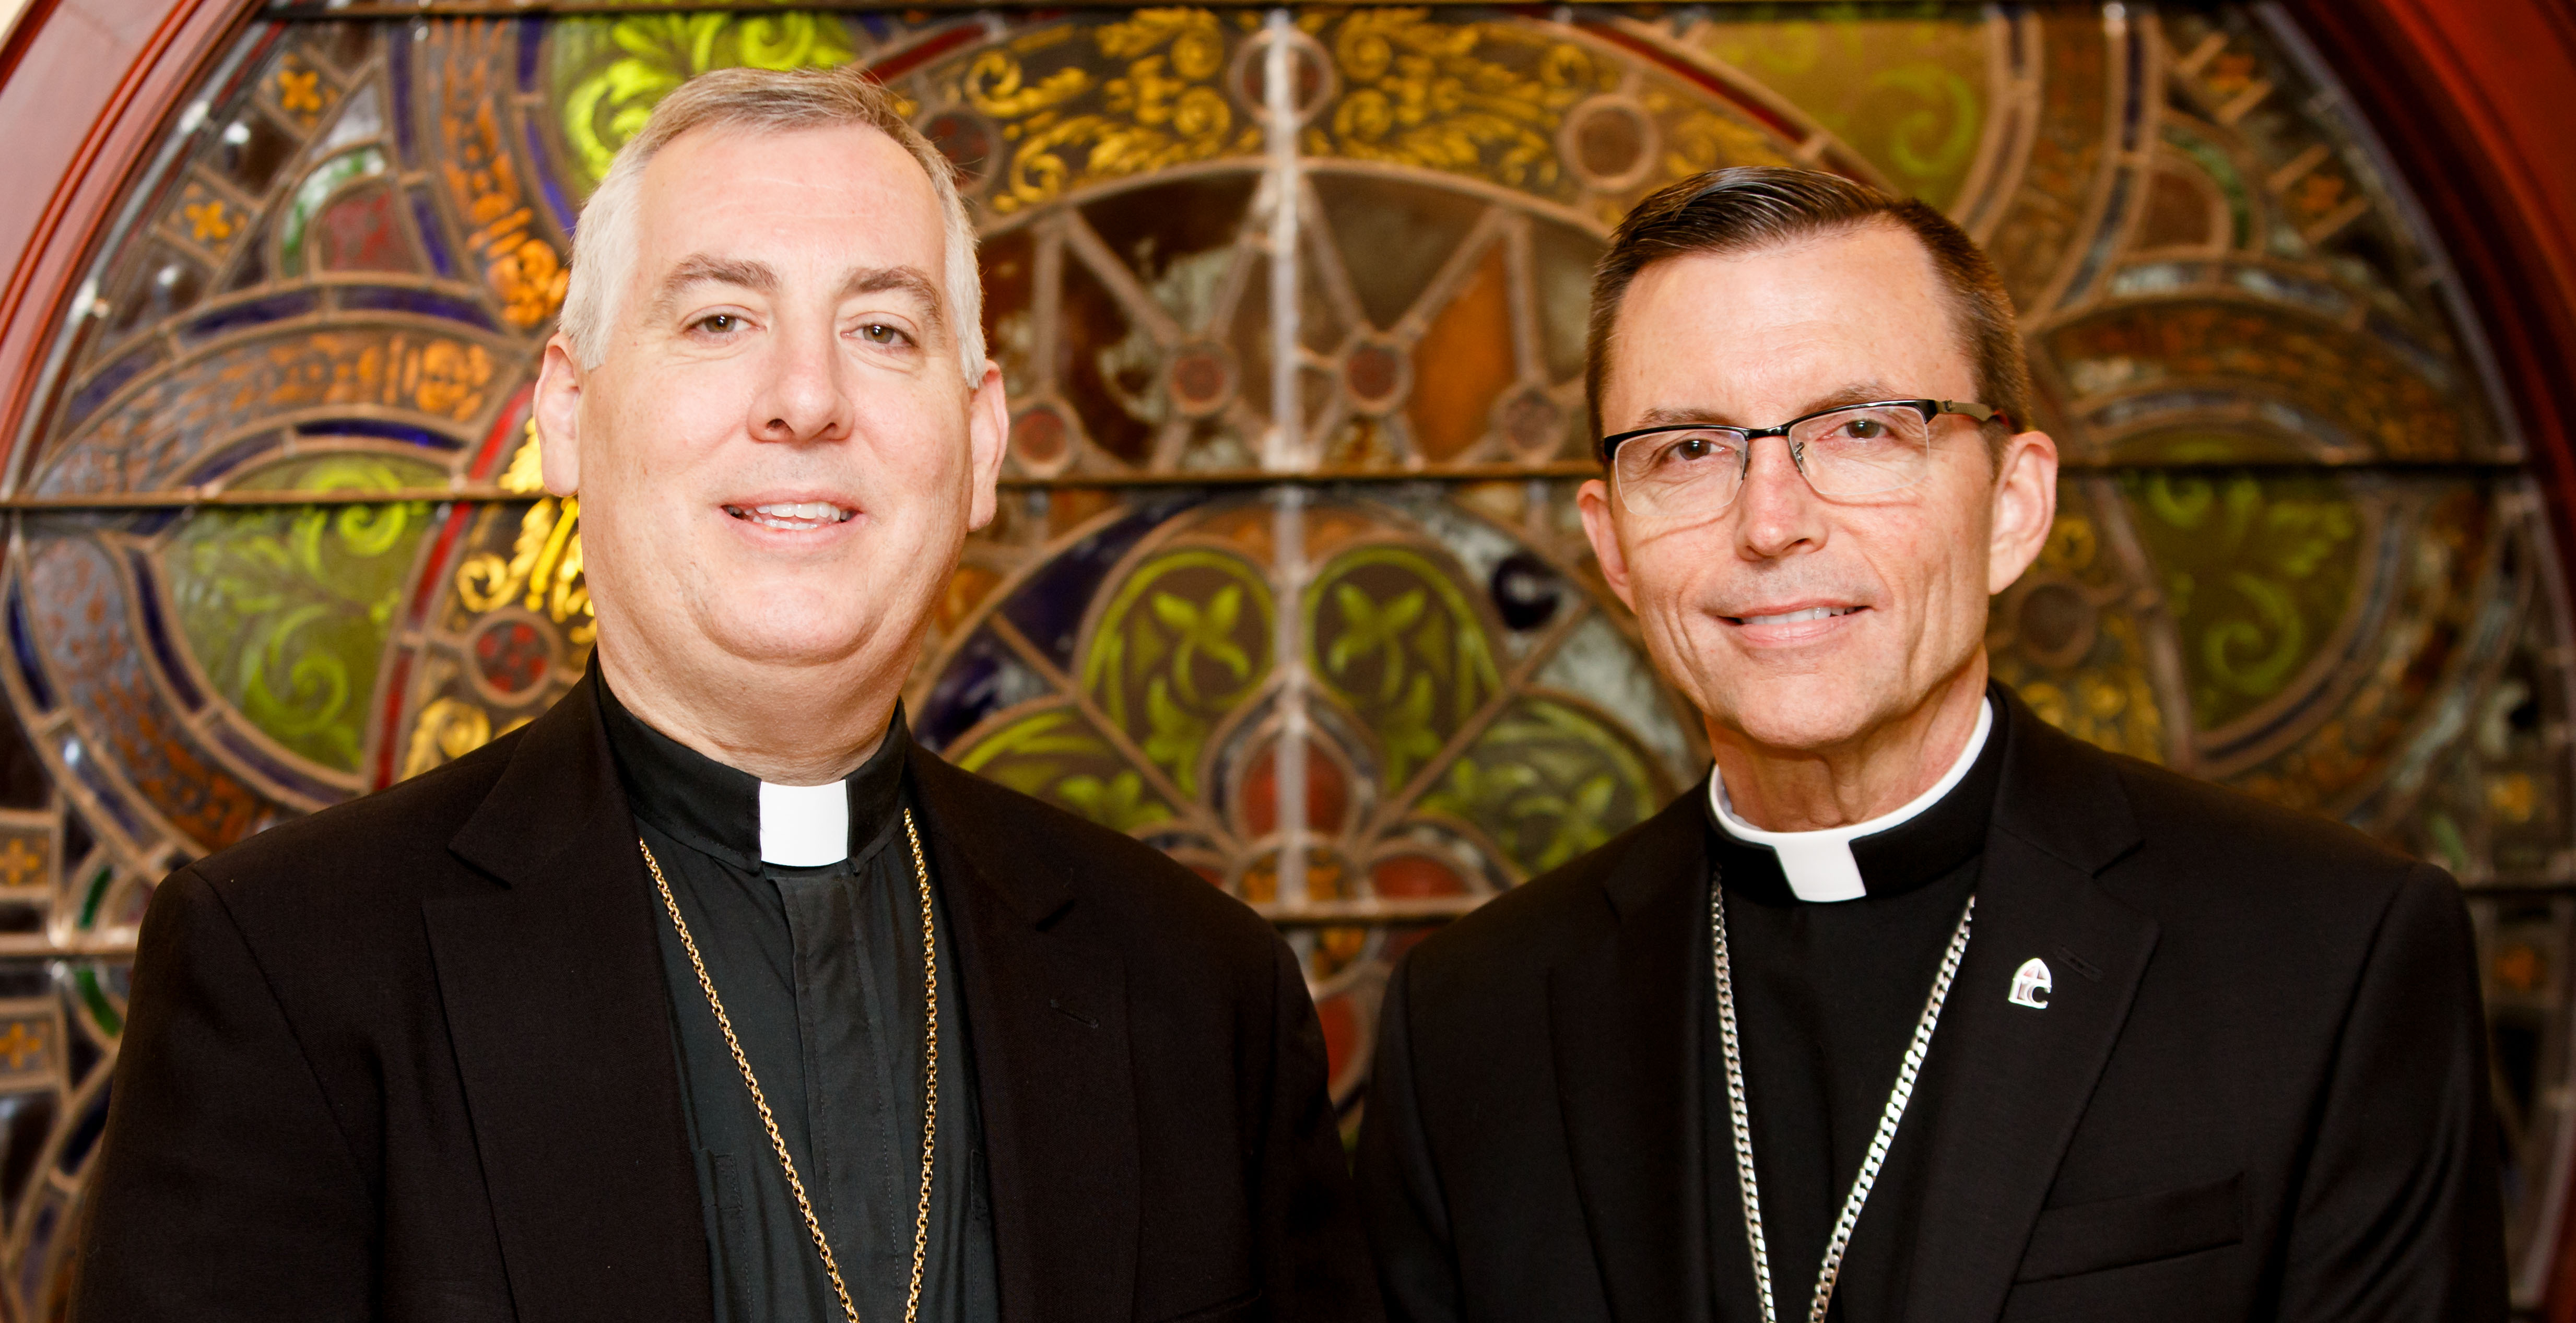 Bishops-elect Robert Reed and Mark O’Connell pictured June 10, 2016.
Photo by Gregory L. Tracy/ The Pilot